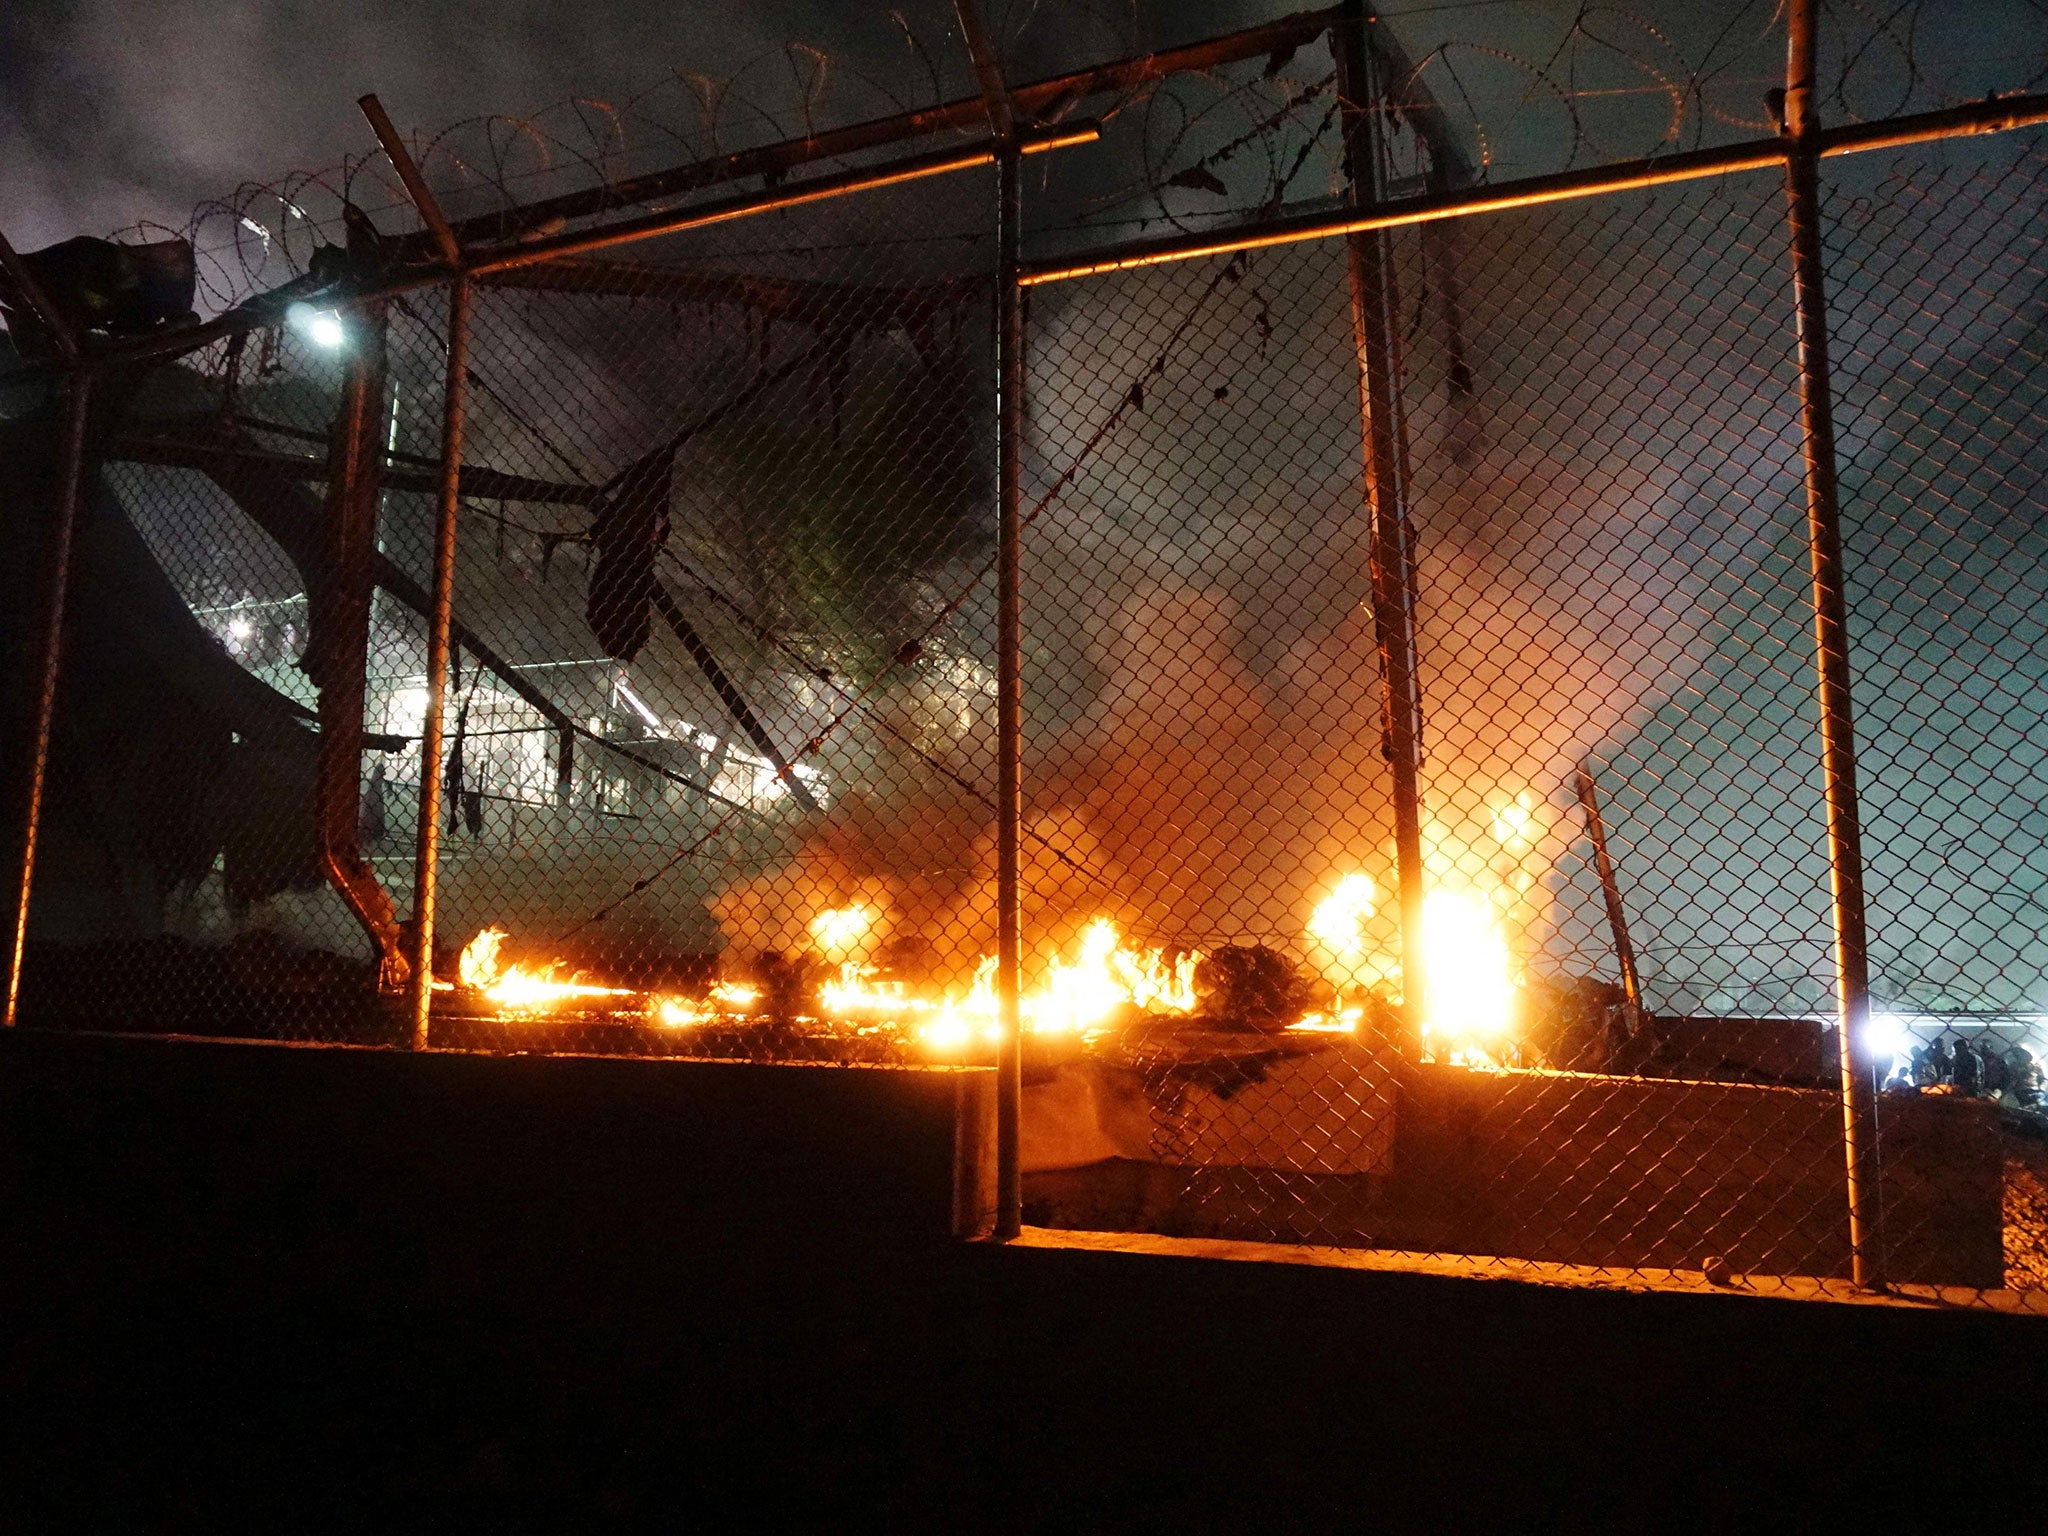 A fire burns at the Moria detention camp following clashes